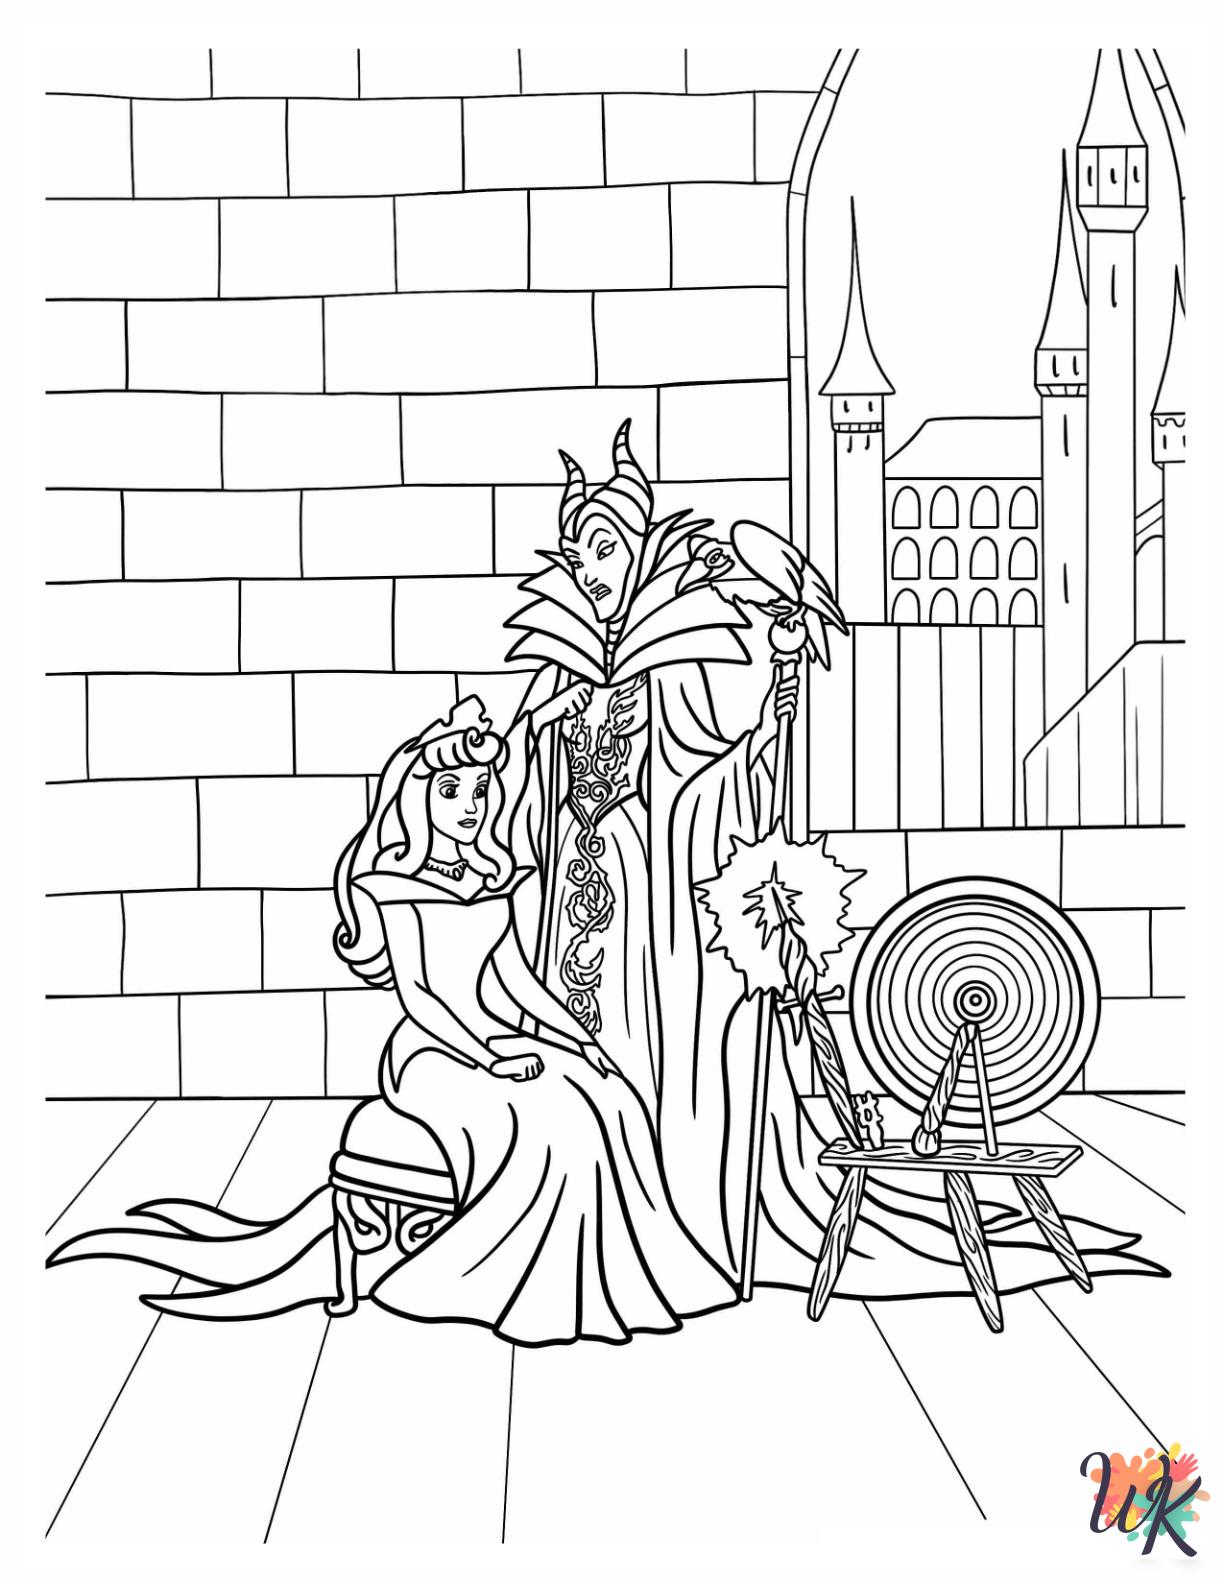 detailed Maleficent coloring pages